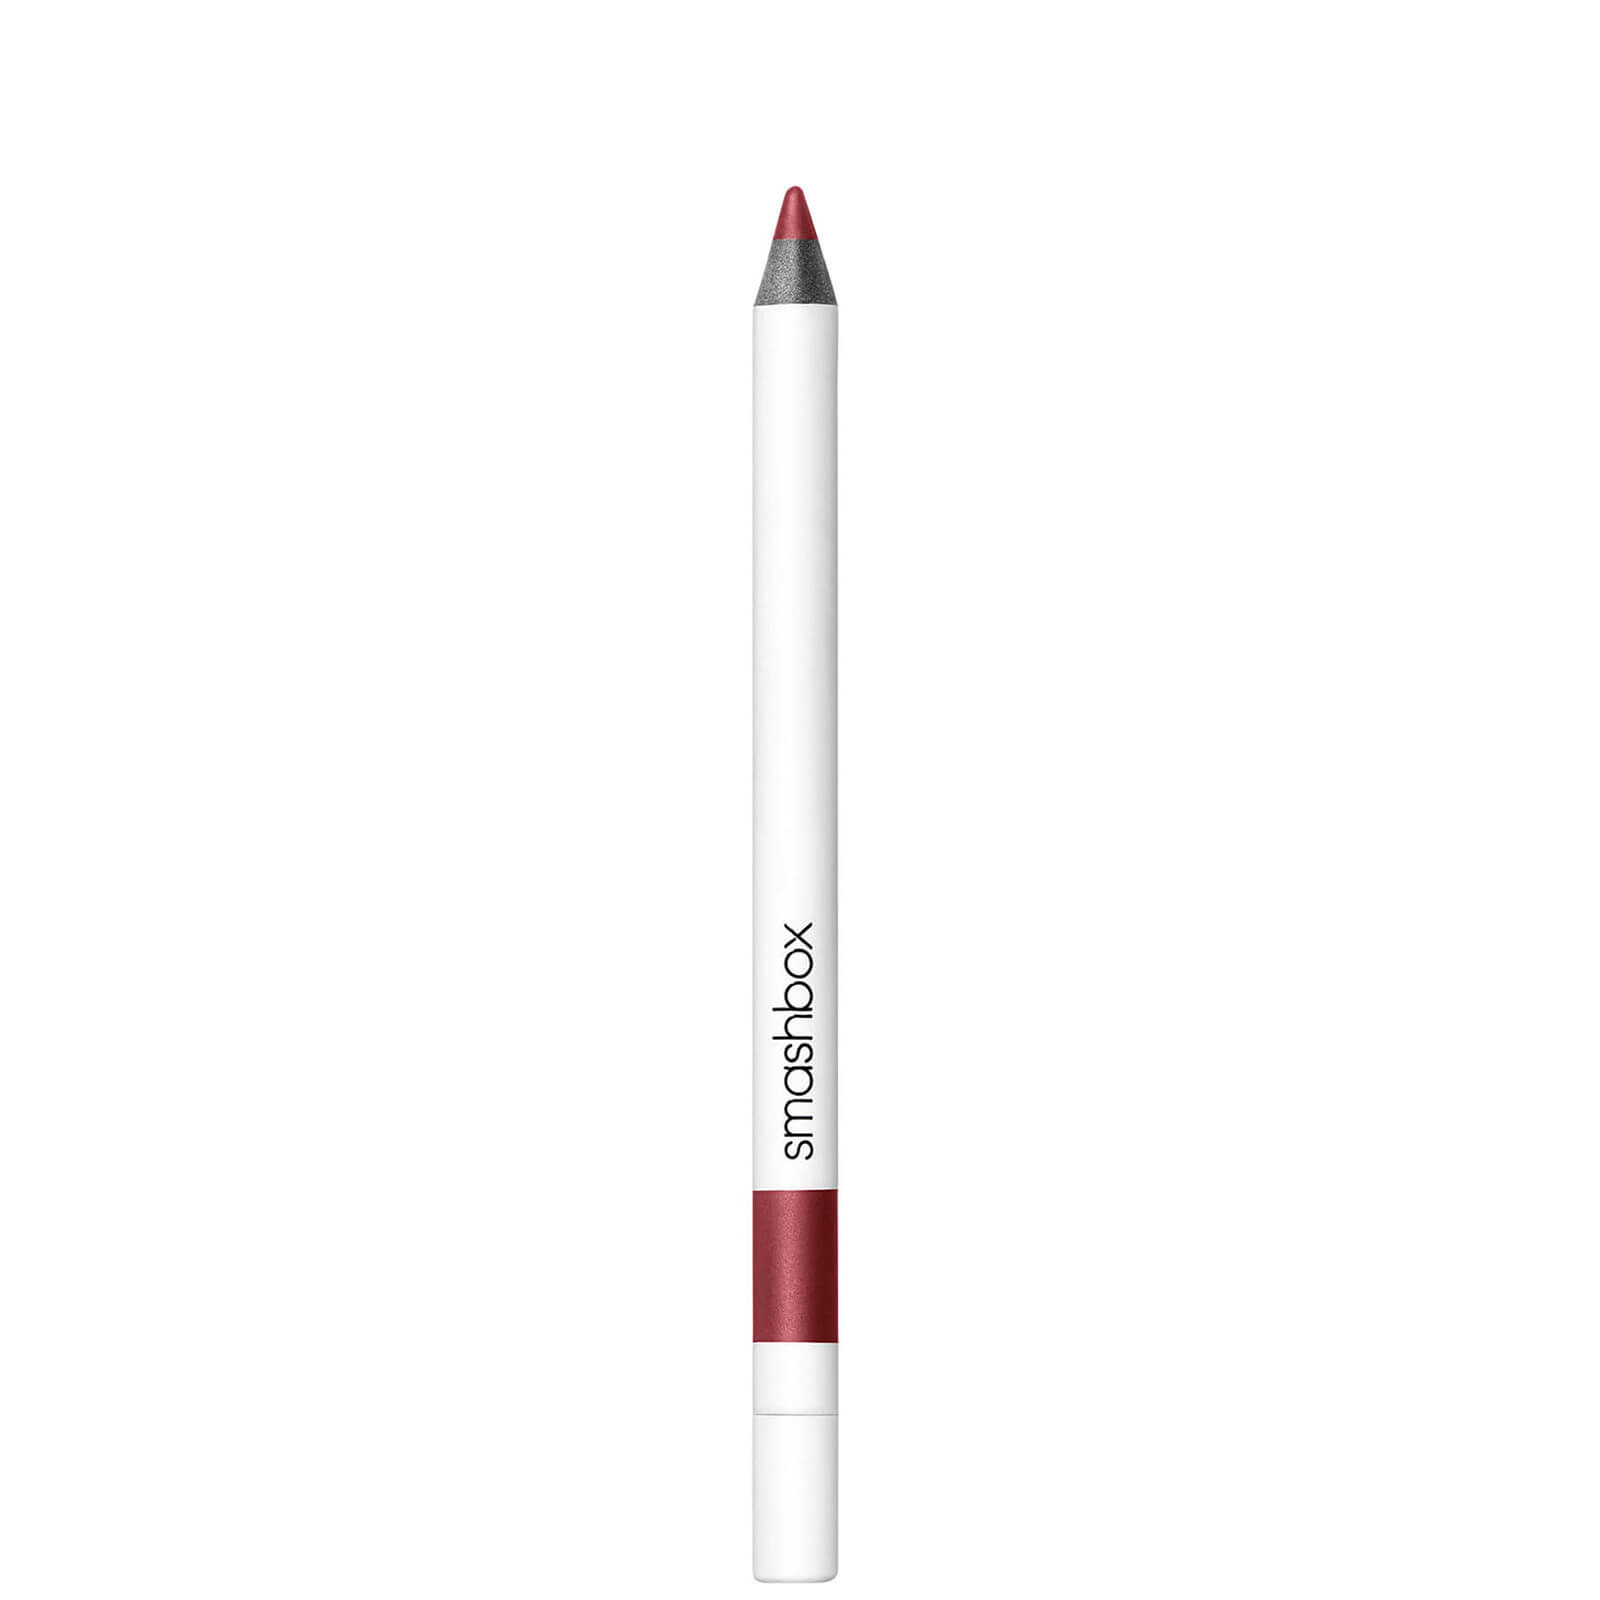 Smashbox Be Legendary Line and Prime Pencil 1.2g (Various Shades) - Dirty Rose